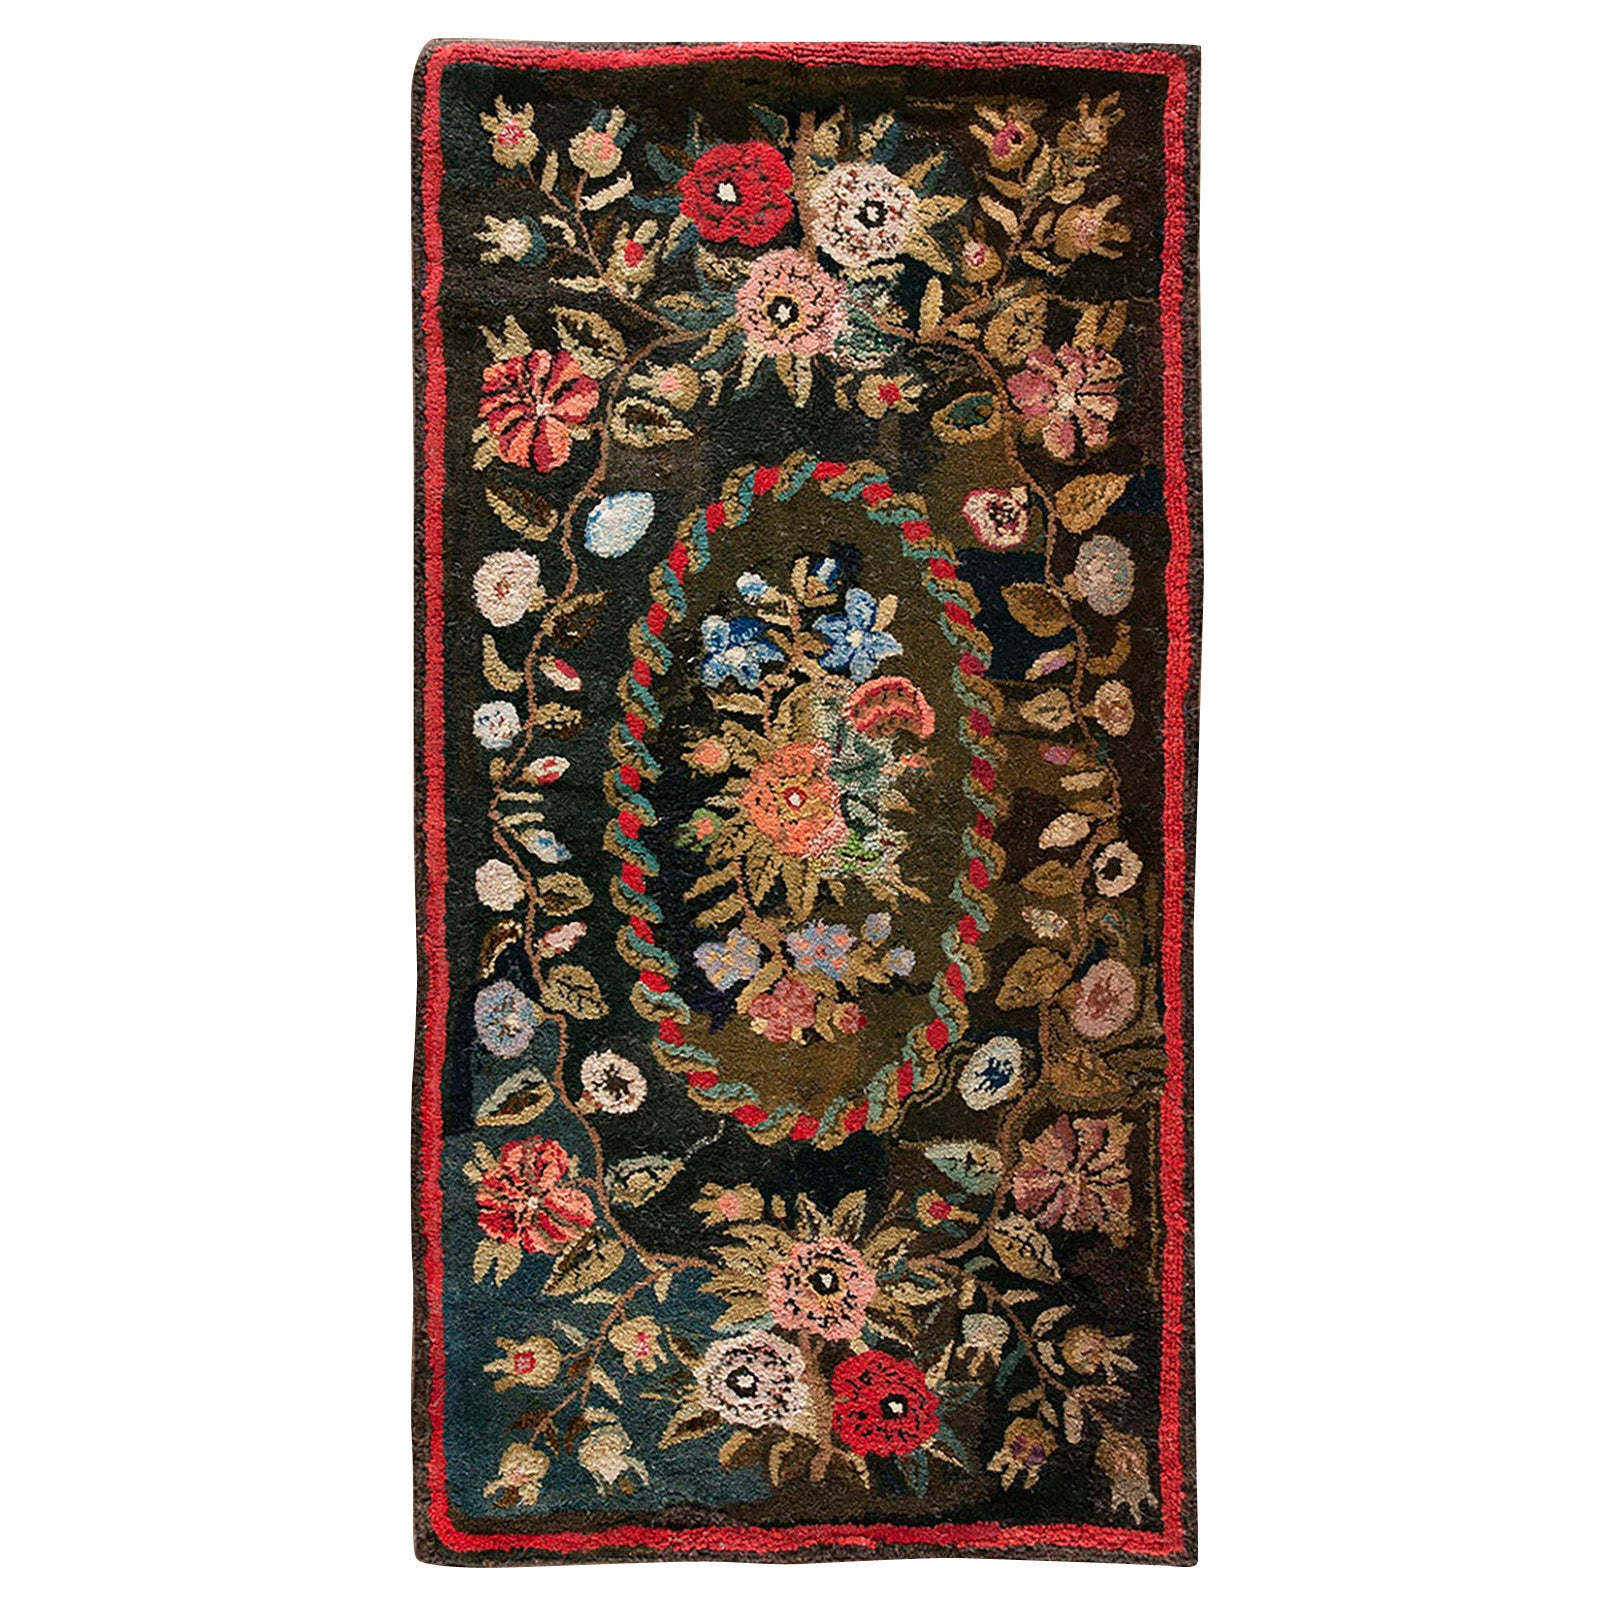 19th Century American Hooked Rug 2' 6"x 5'  For Sale